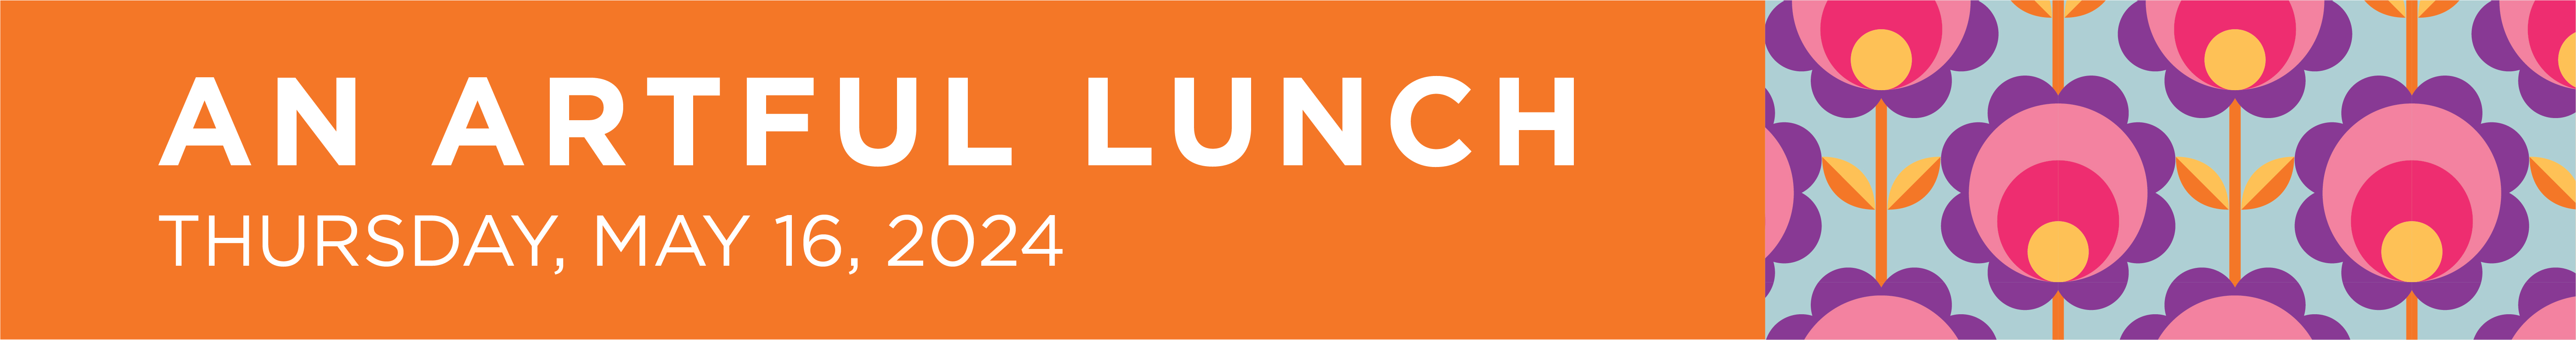 "An Artful Lunch: Thursday, May 16, 2024" (written in white on orange background)